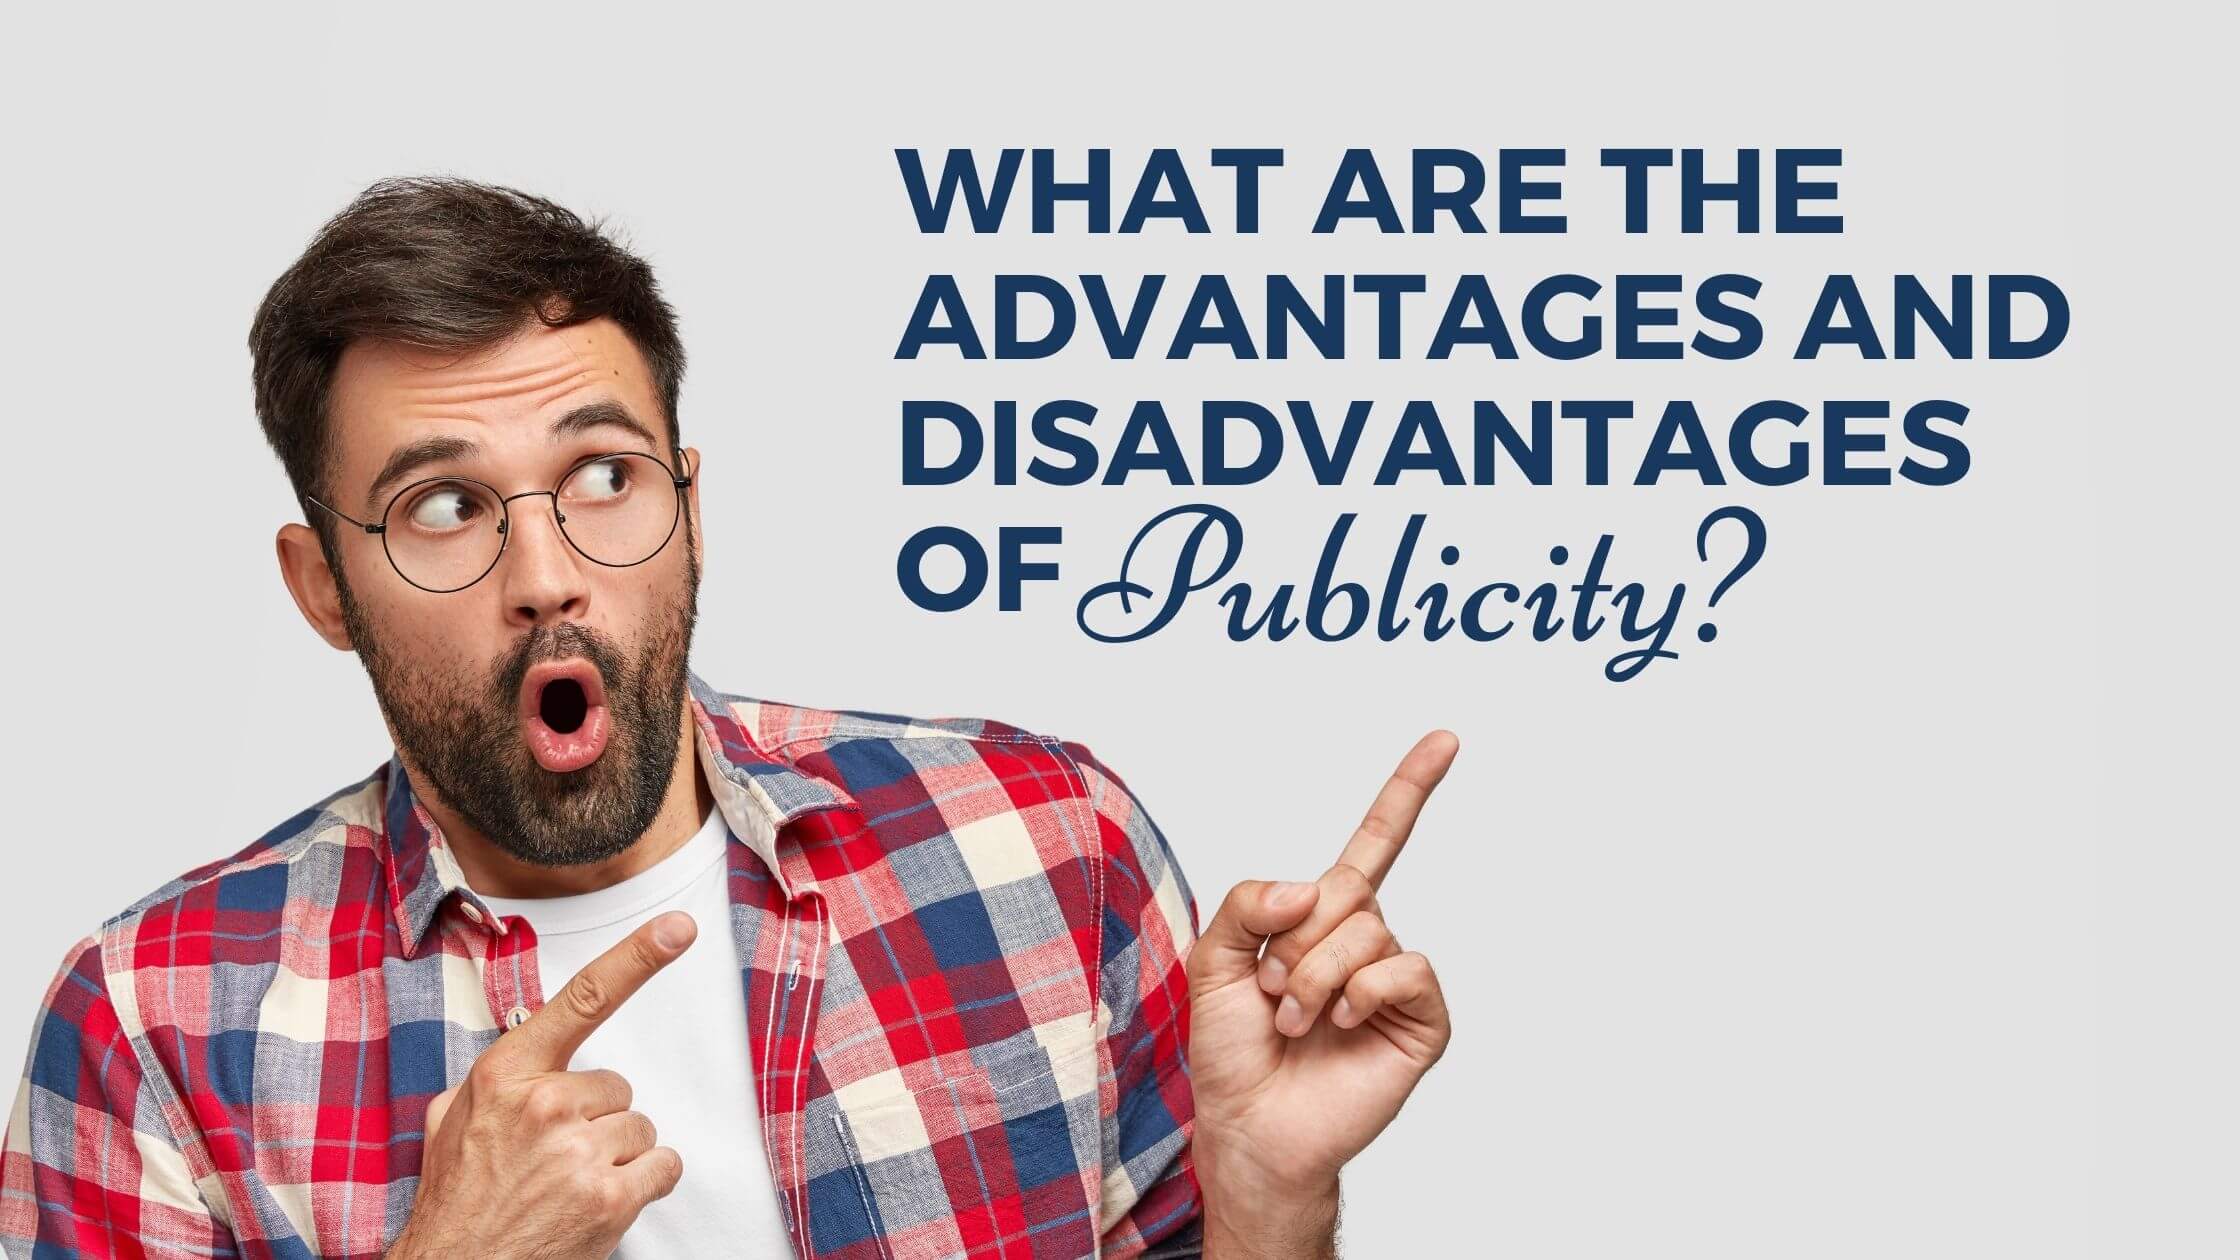 What are the Advantages and Disadvantages of Publicity